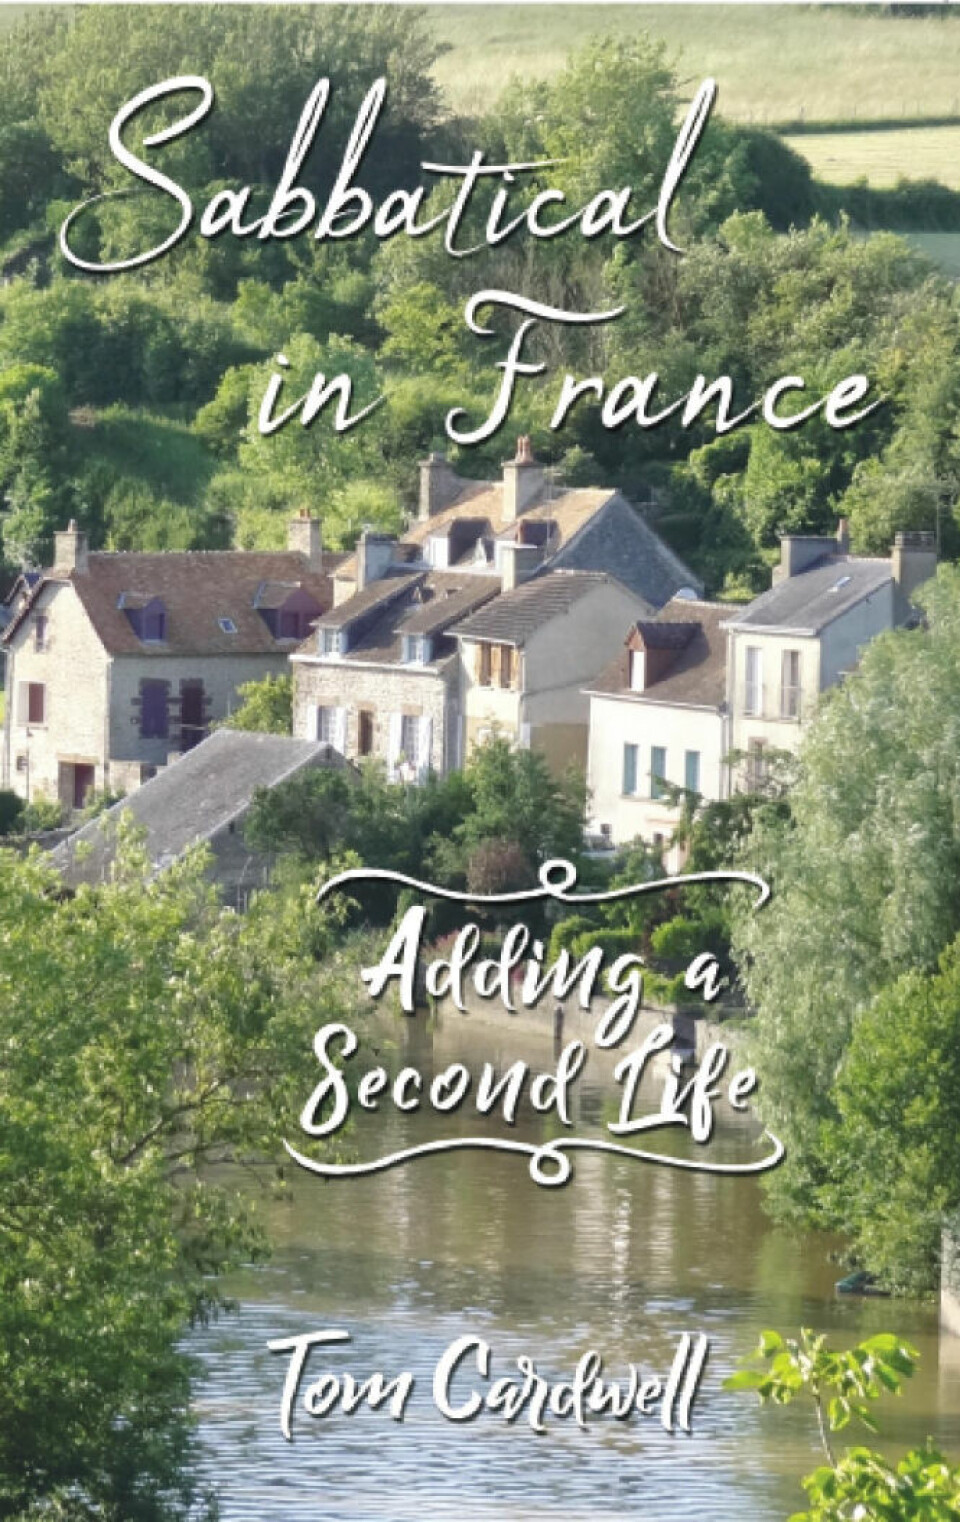 Sabbatical in France: Adding a Second Life Tom Cardwell, Legacy Book Publishing, €7.15, ISBN: 978-1-947718-76-0